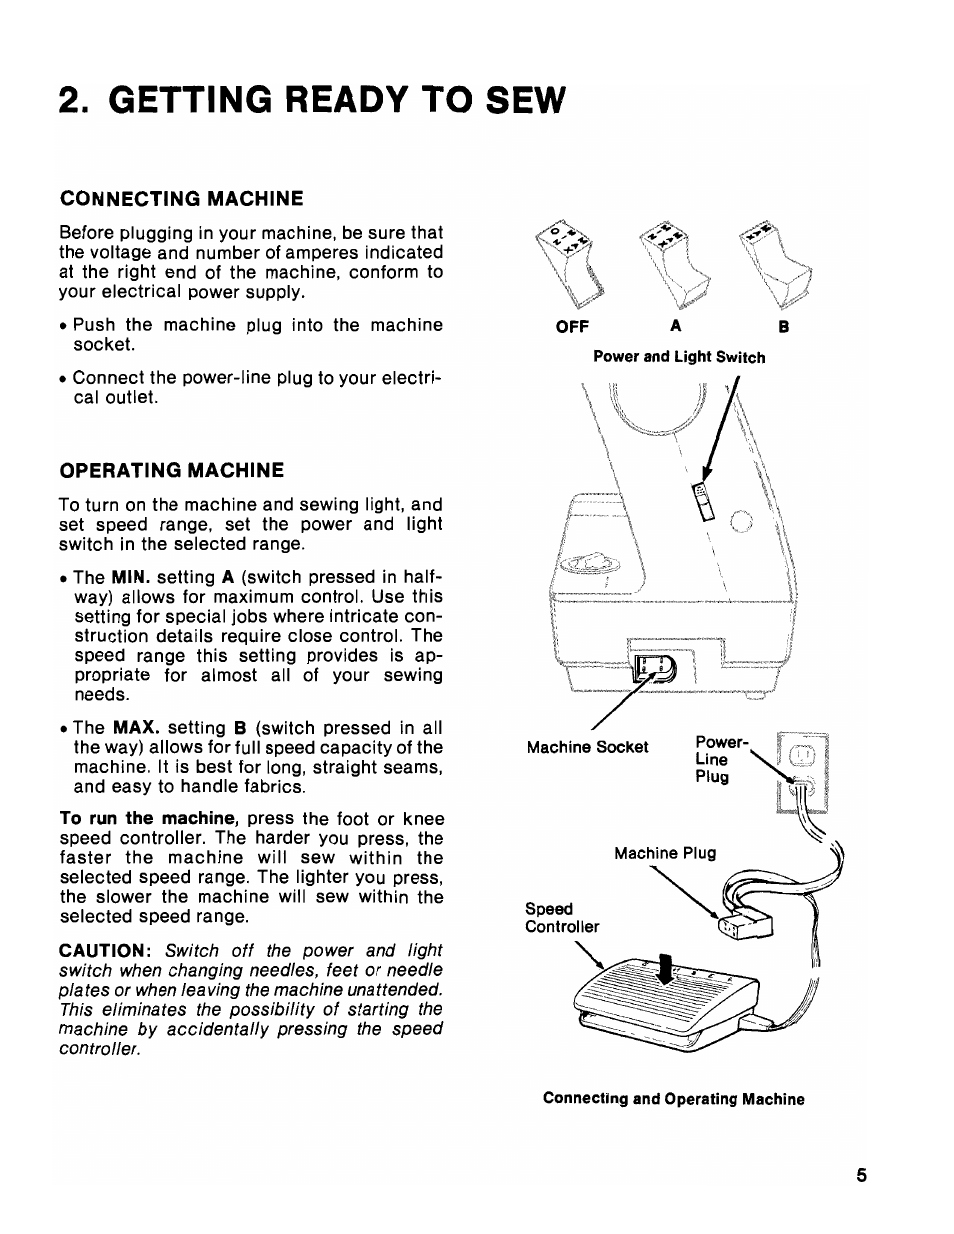 Getting ready to sew, Connecting machine, Operating machine | R / \ i i | SINGER 1036 Creative Touch User Manual | Page 10 / 66